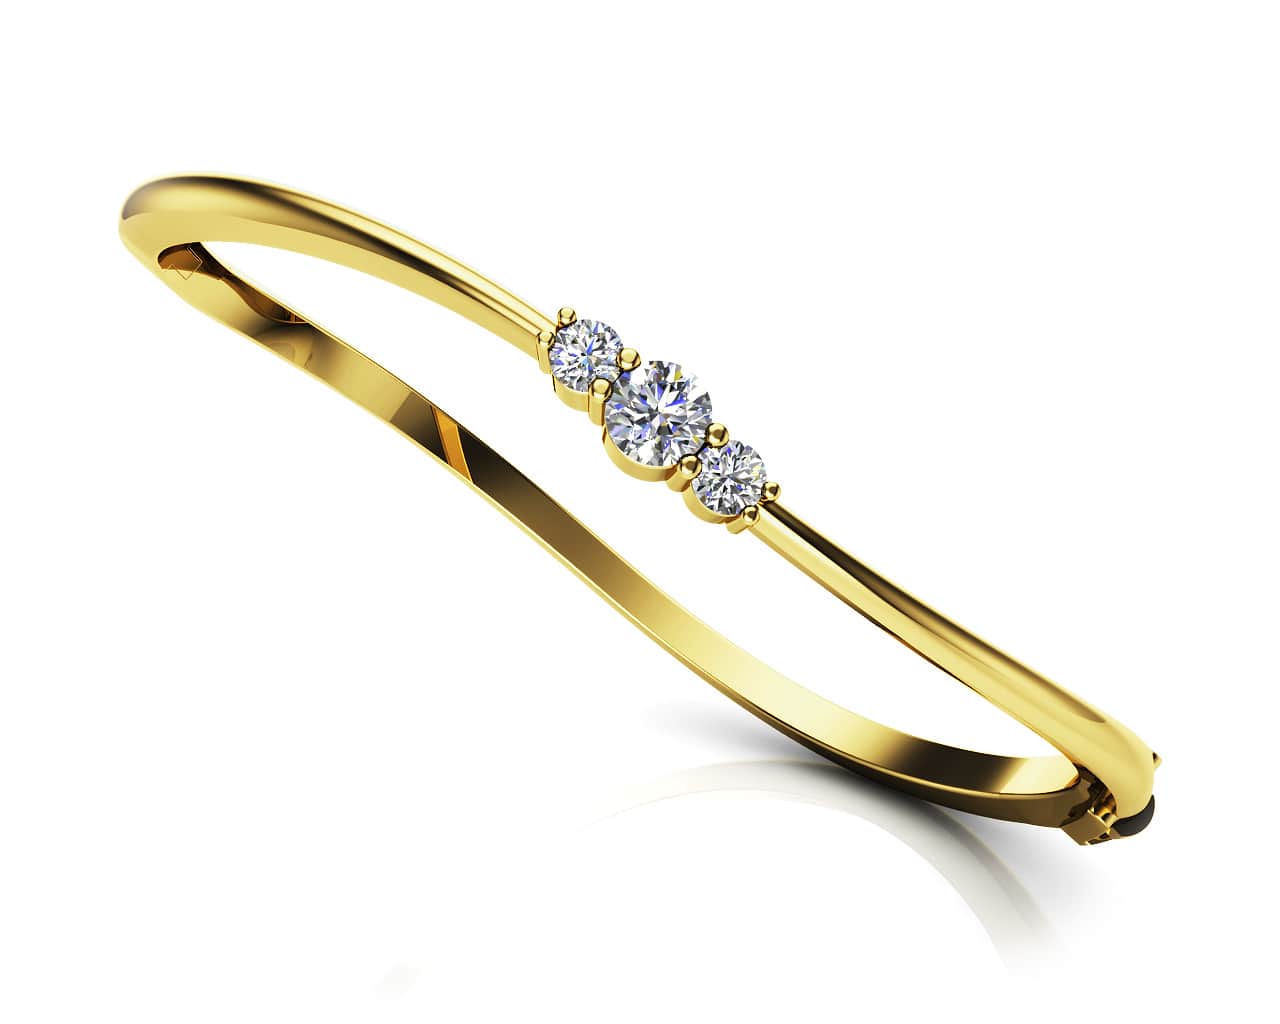 Legendary Curved Diamond Bangle Available In Gold Or Platinum